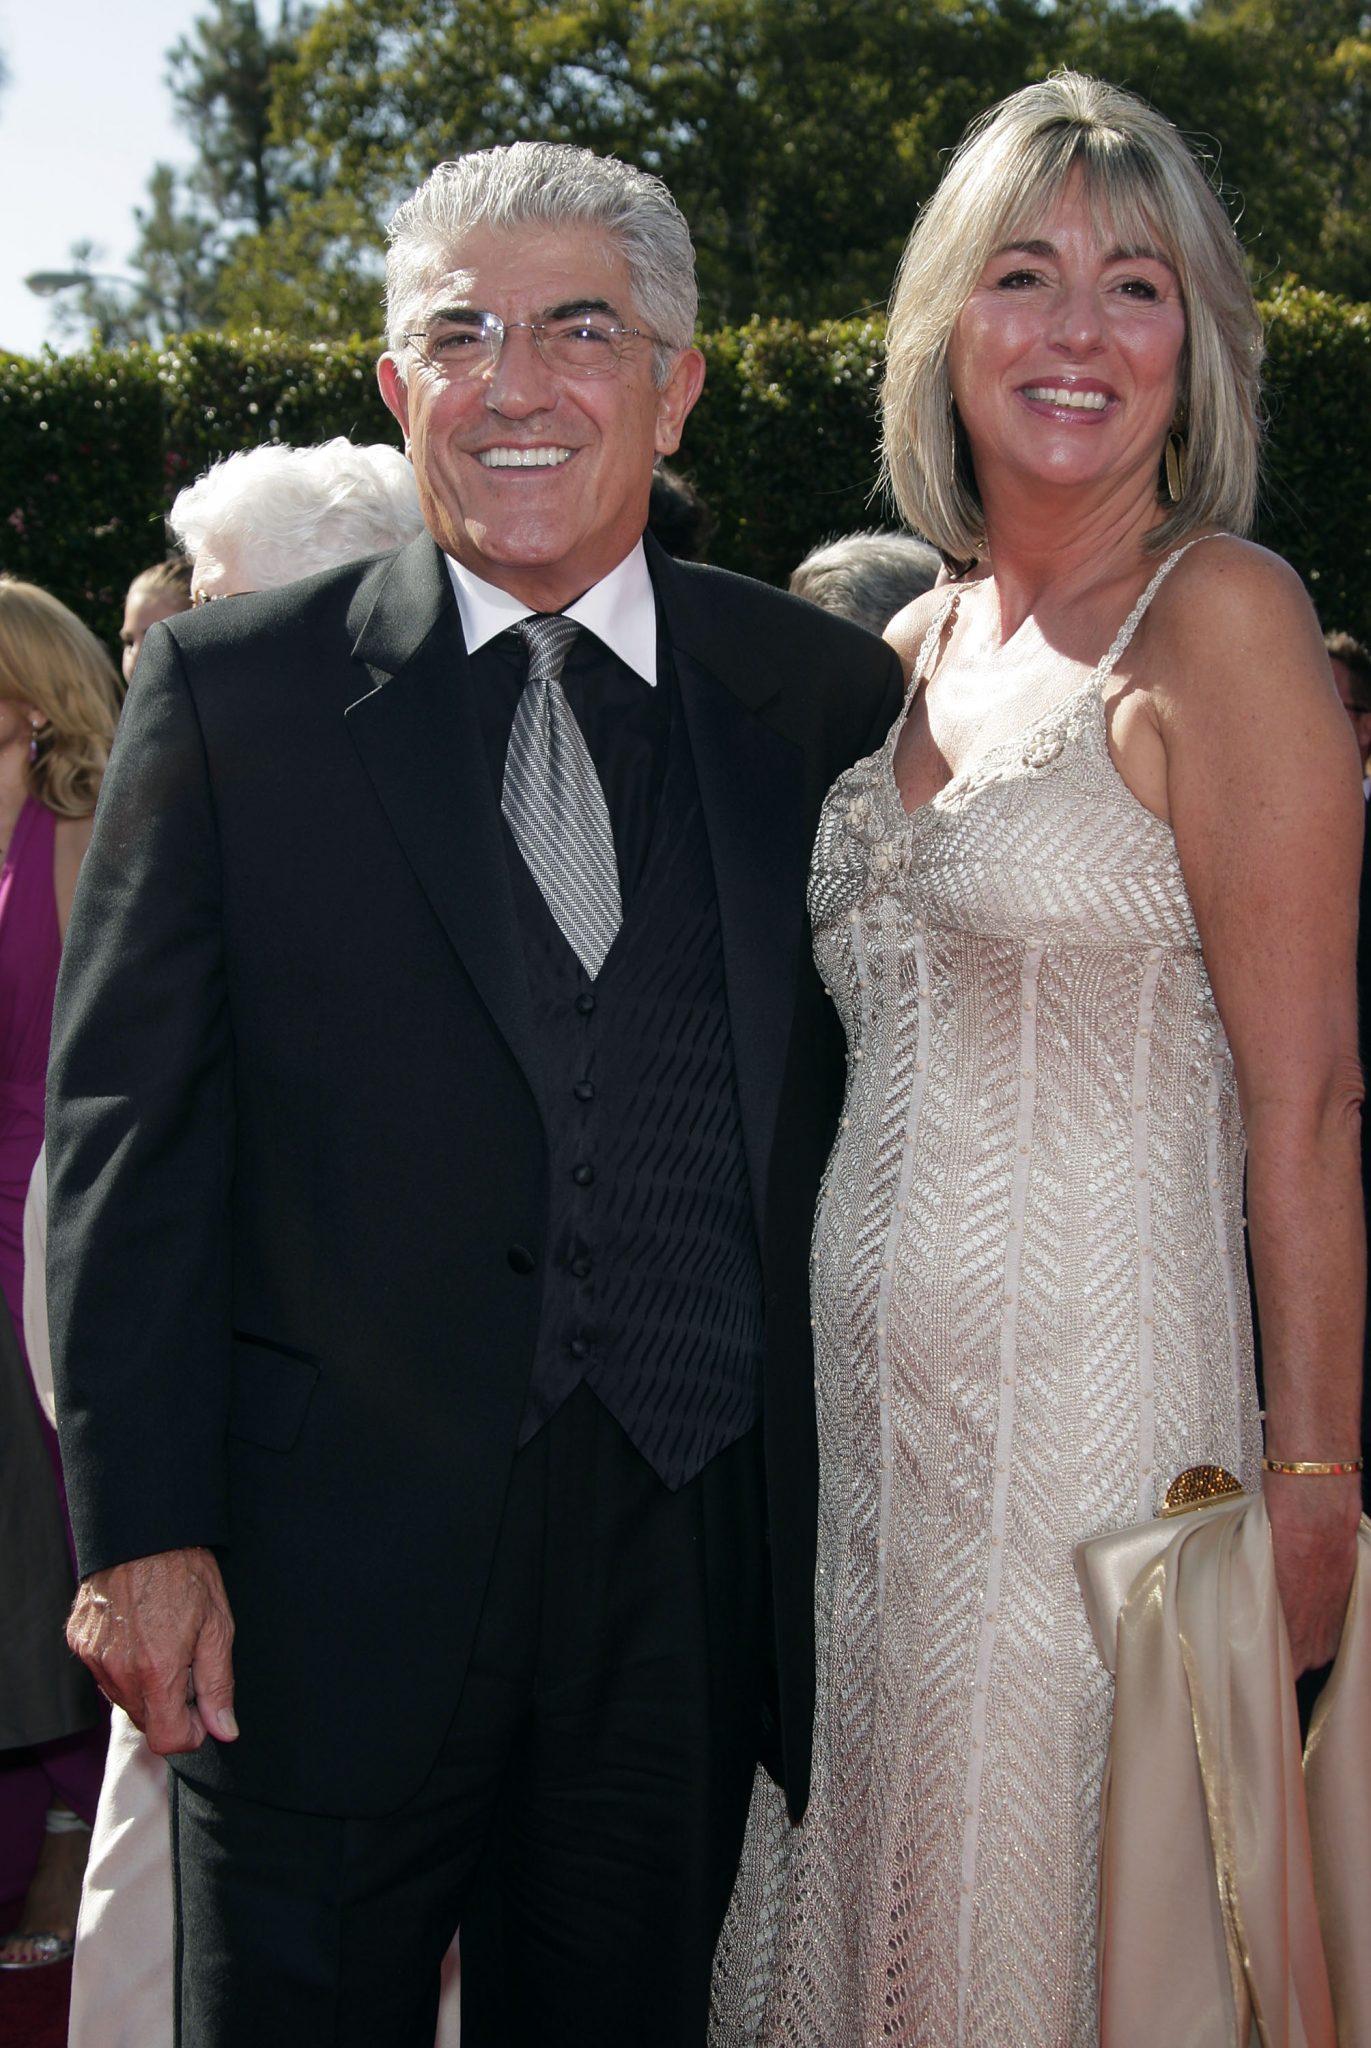 Kathleen Vincent Wiki: Facts to Know about Frank Vincent's Wife